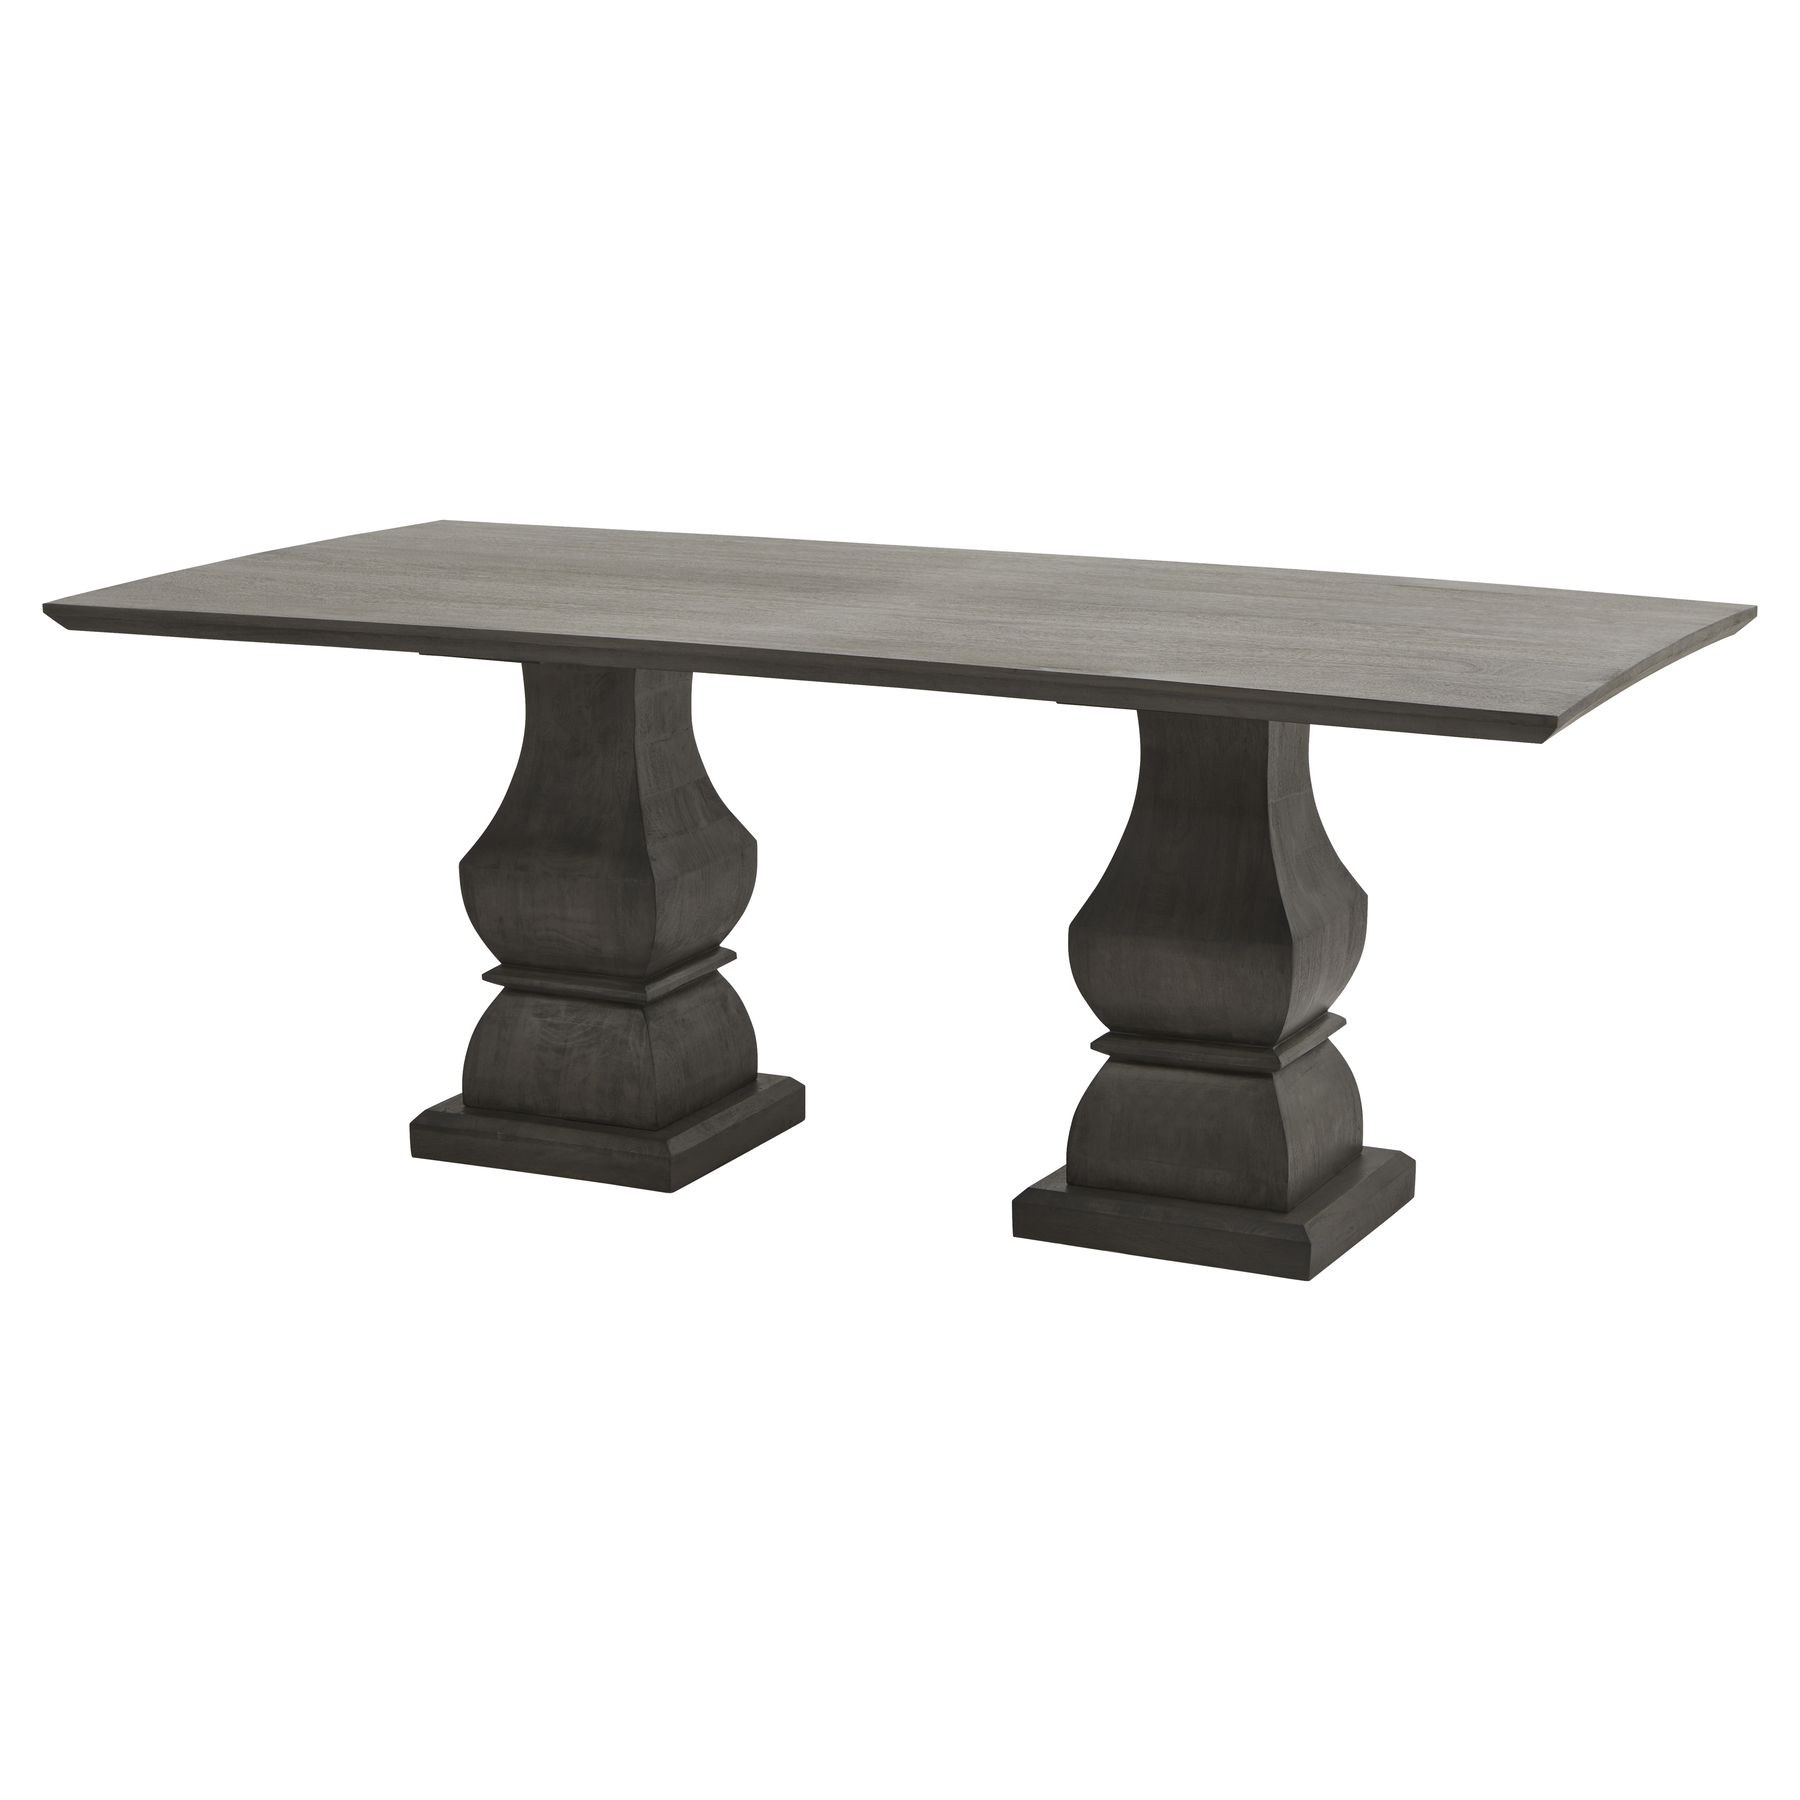 Lucia Collection Dining Table - Image 1